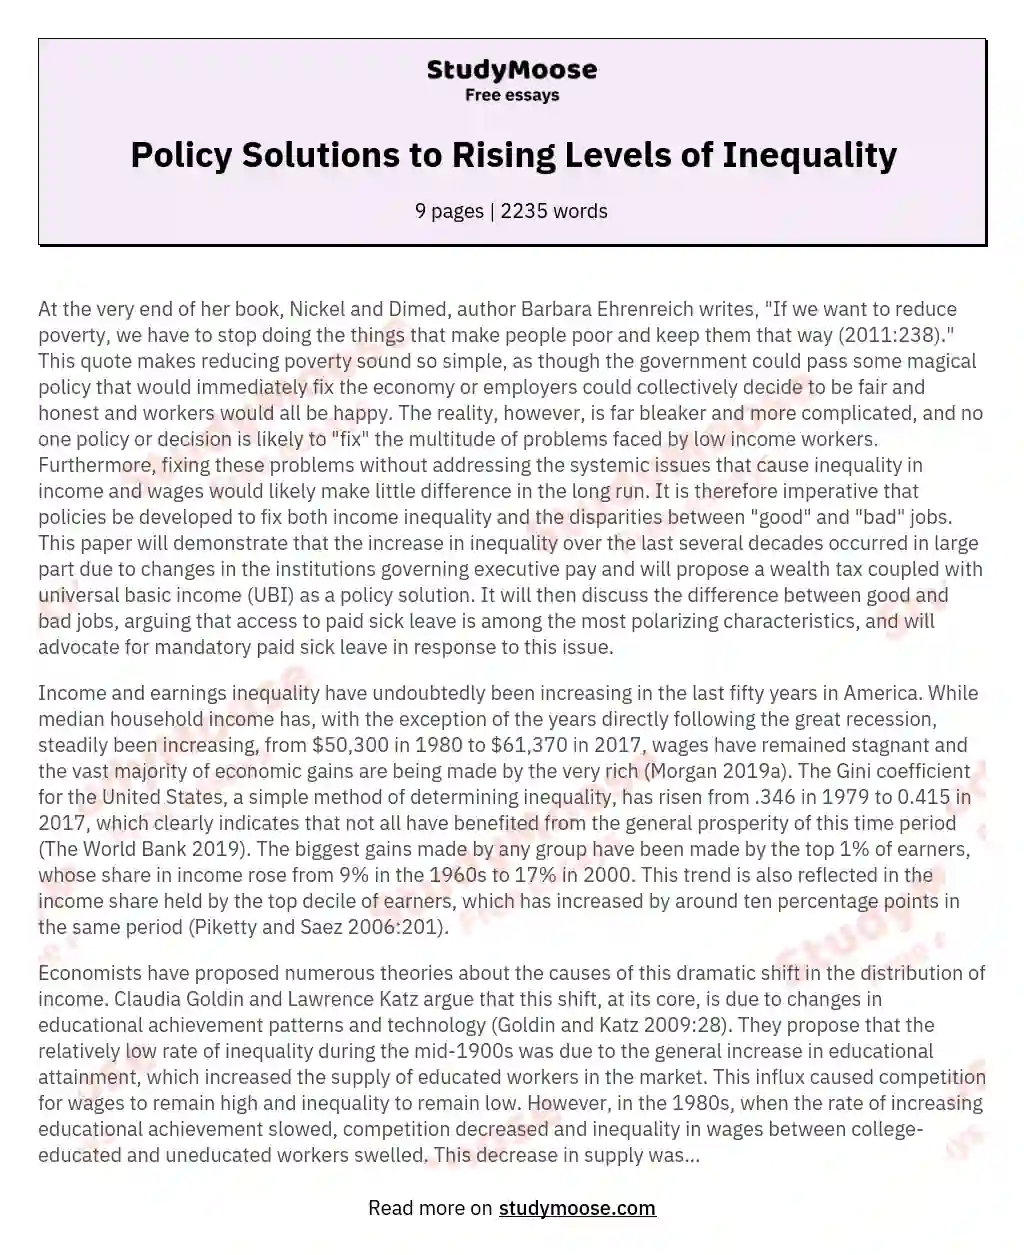 Policy Solutions to Rising Levels of Inequality essay